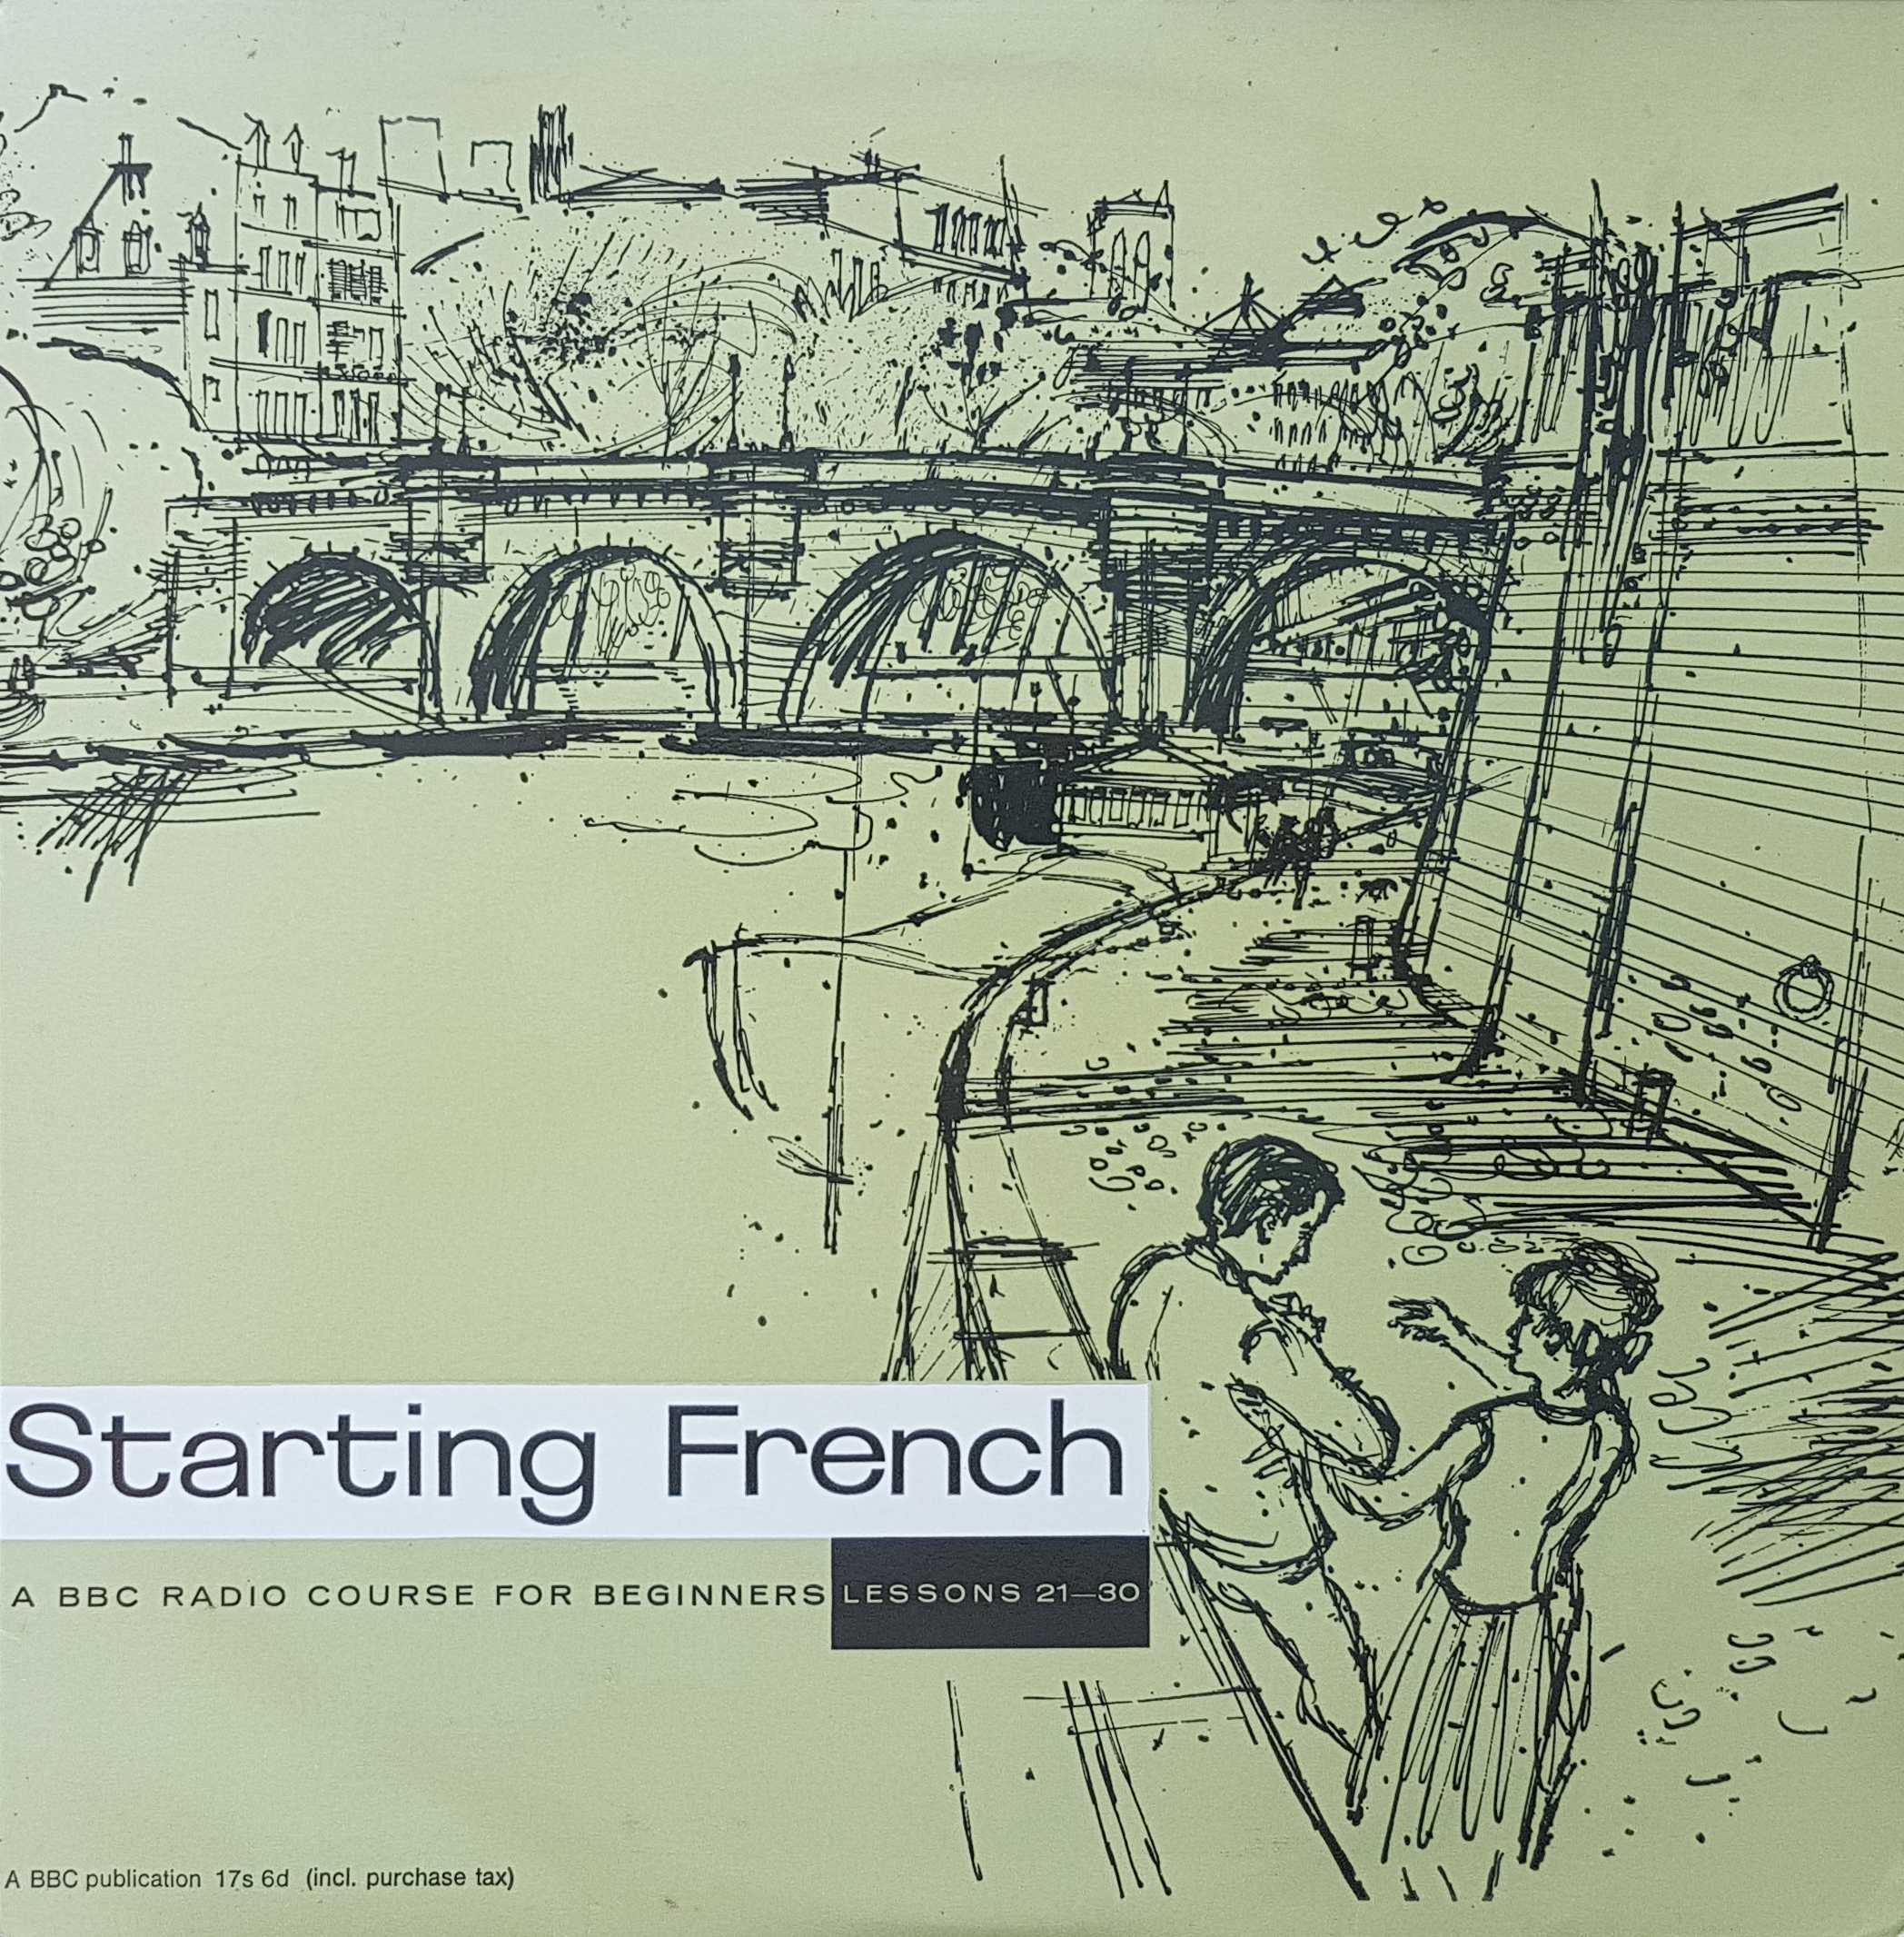 Picture of Starting French - Parts 21 - 30 by artist Elsie Ferguson from the BBC albums - Records and Tapes library